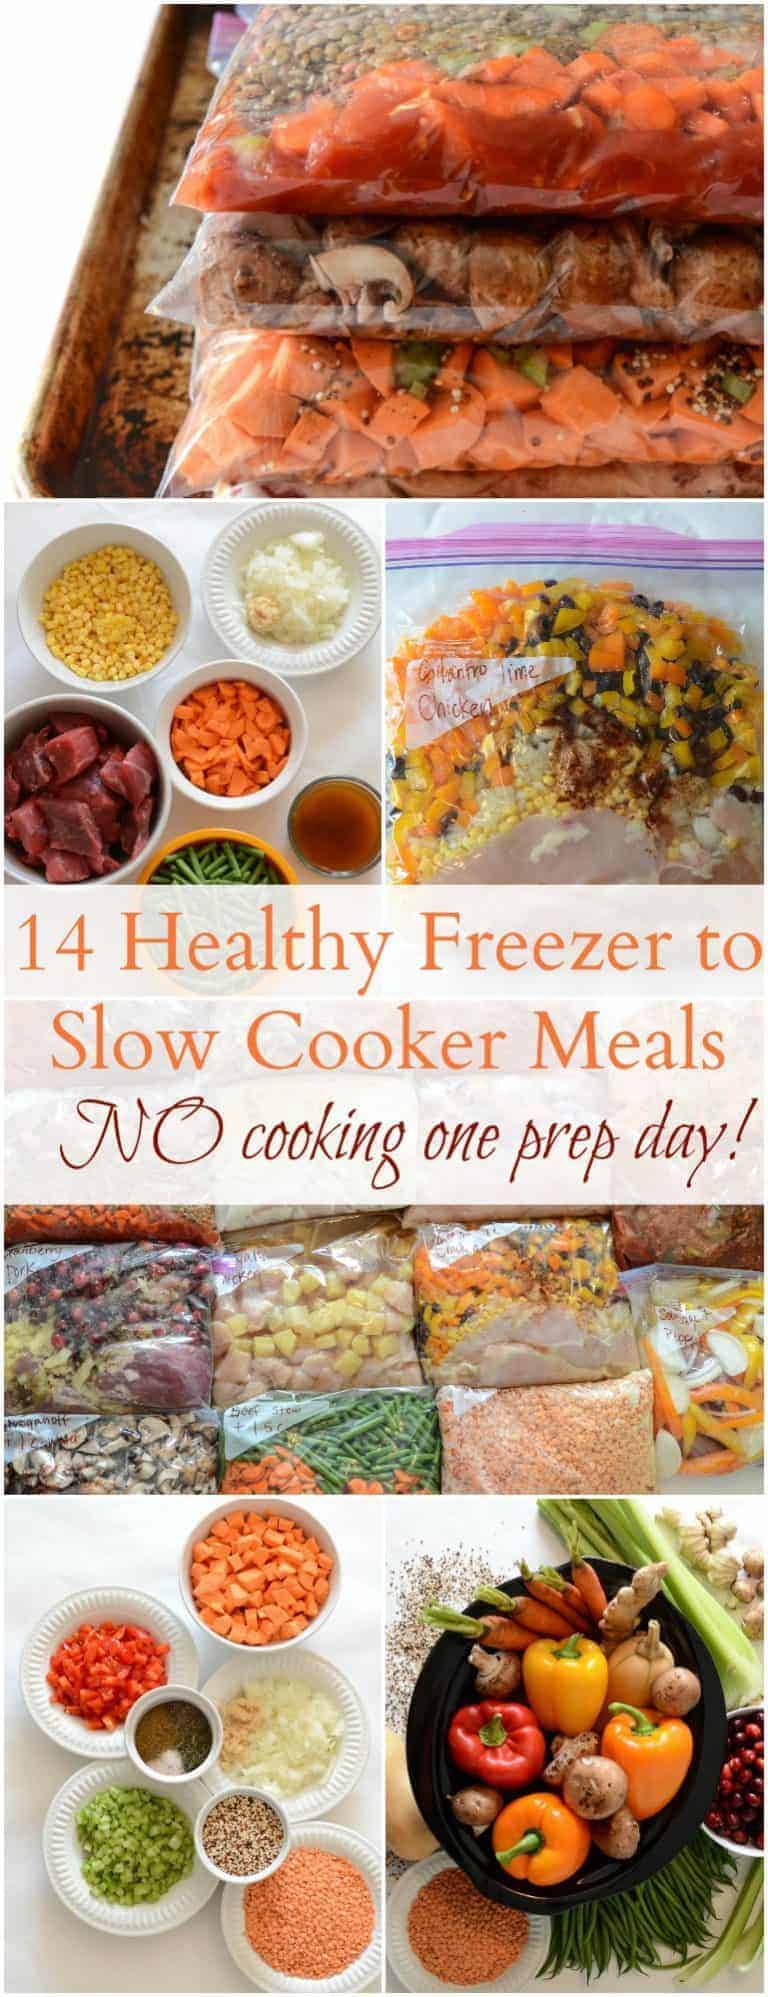 14 Healthy Freezer to Slow Cooker Recipes | Bless this Mess